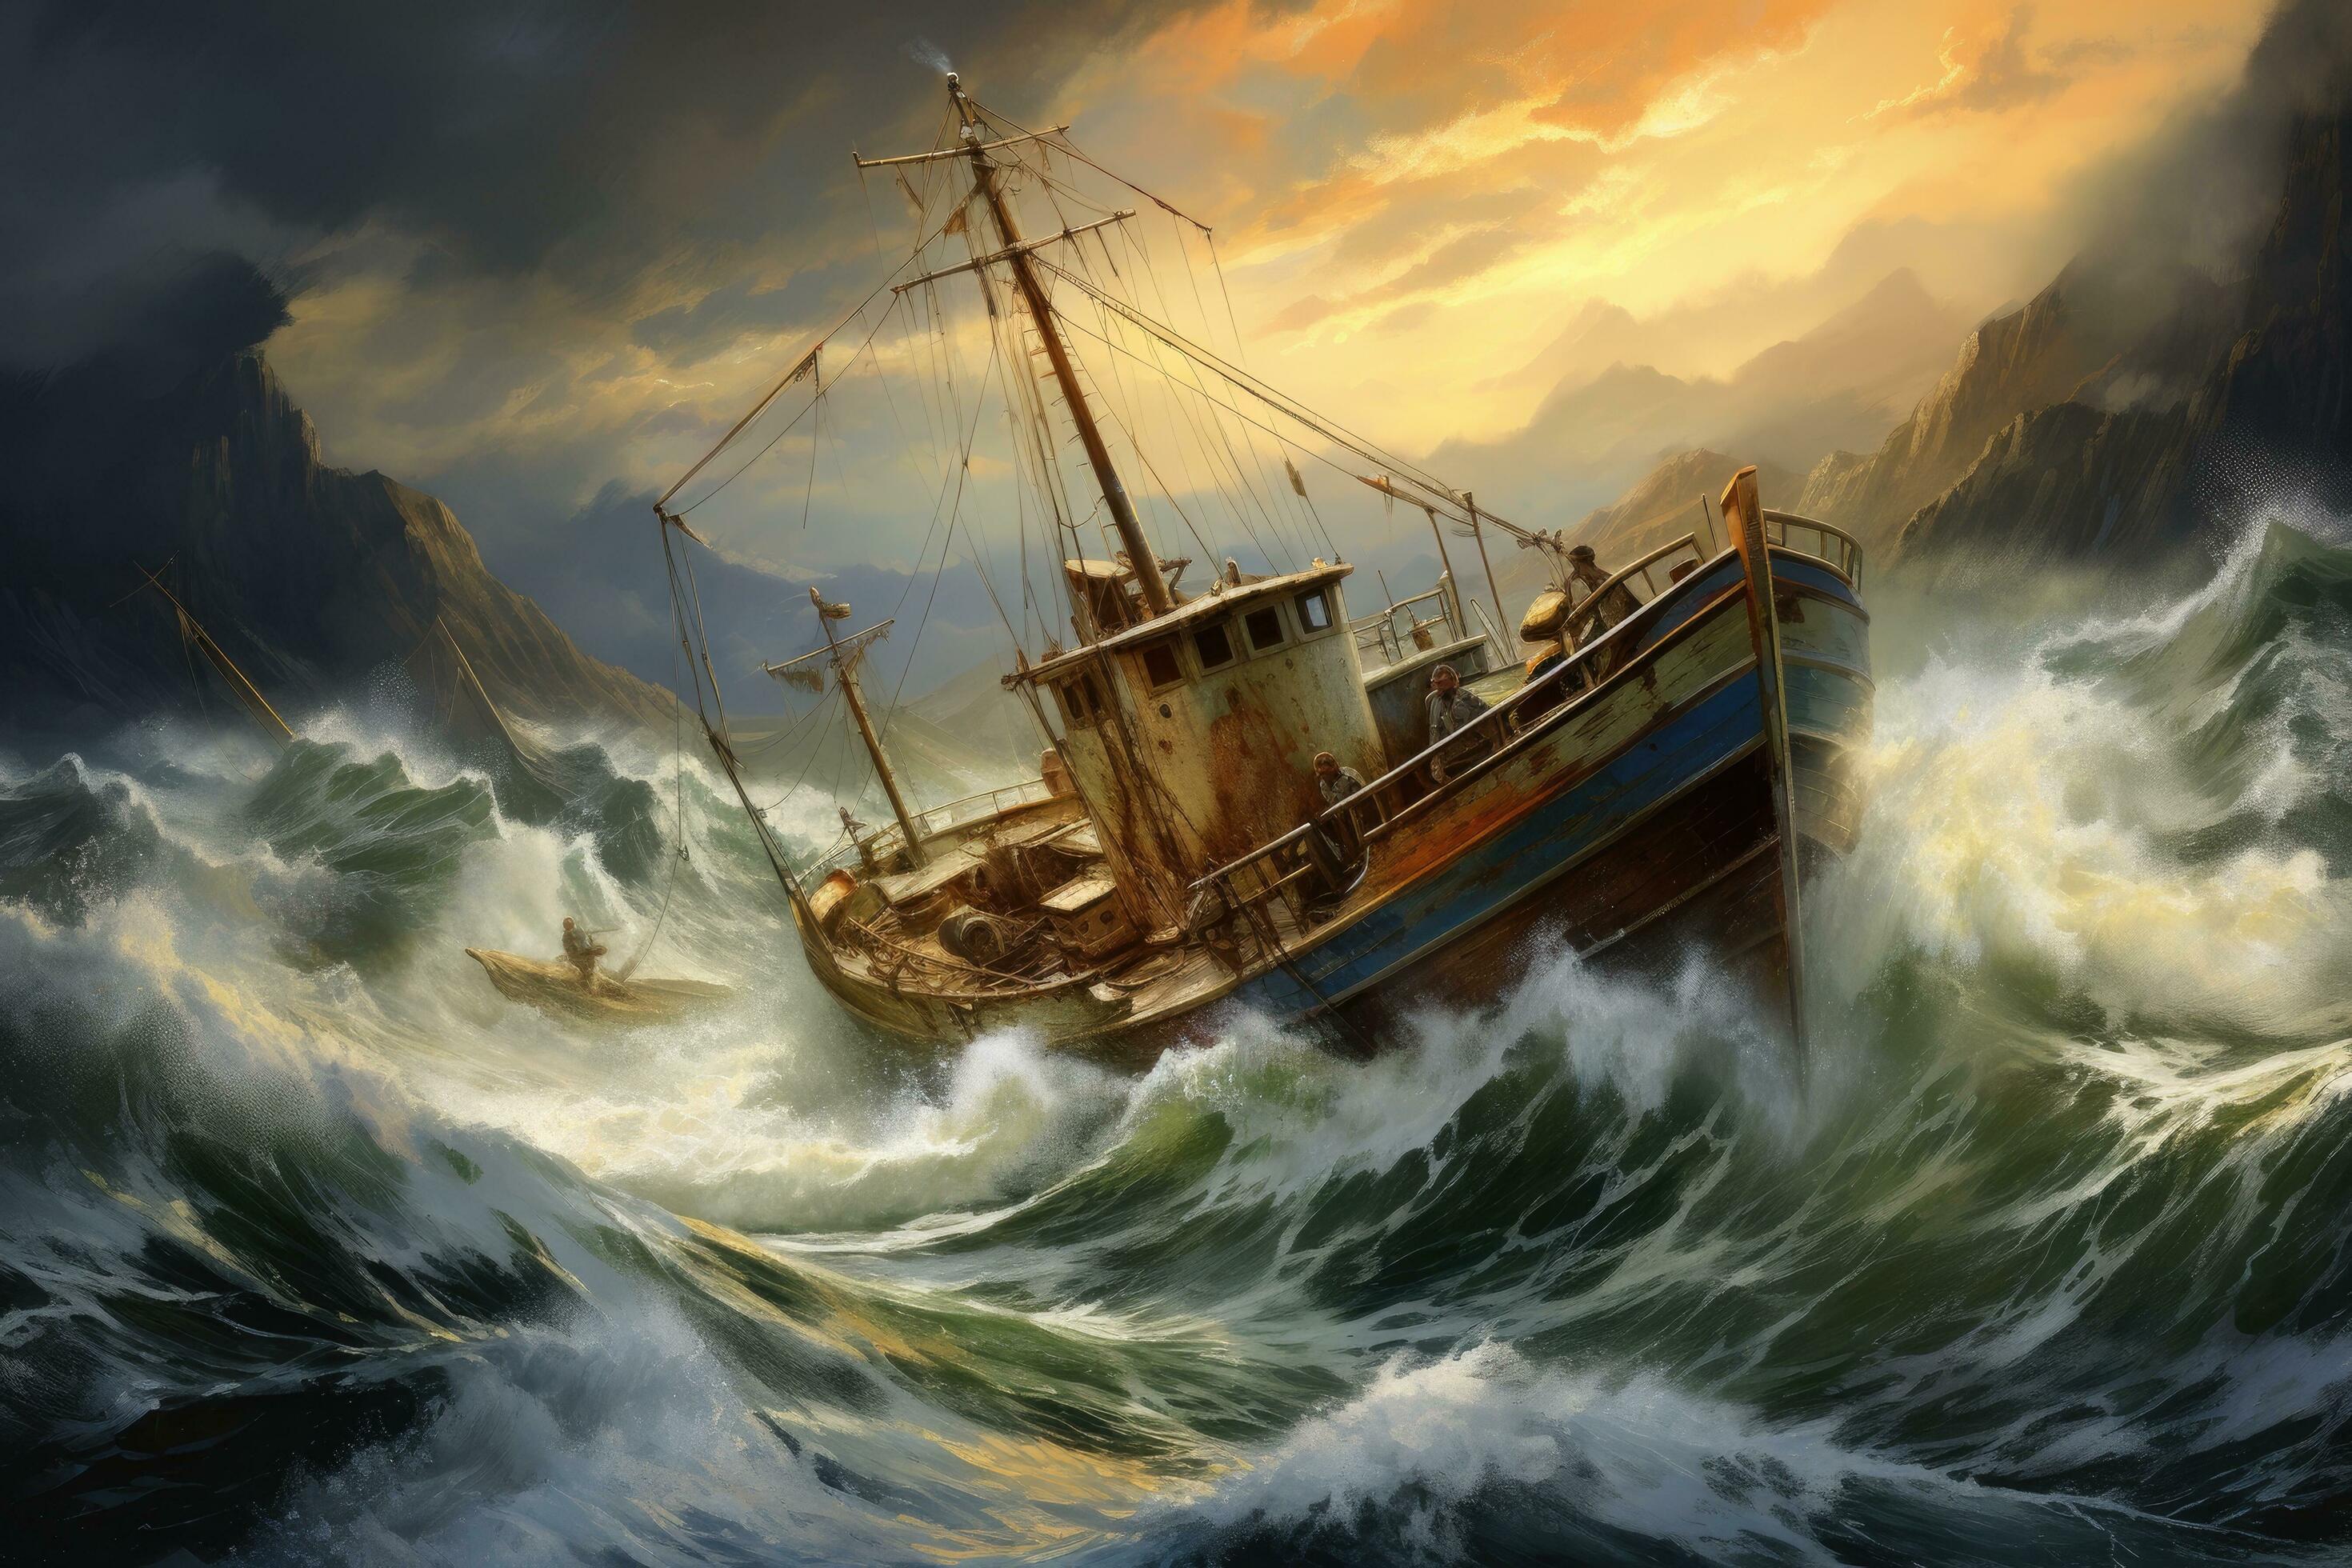 https://static.vecteezy.com/system/resources/previews/034/967/751/large_2x/ai-generated-old-ship-in-stormy-sea-with-storm-waves-3d-illustration-a-vintage-fishing-boat-navigating-rough-seas-ai-generated-free-photo.jpg